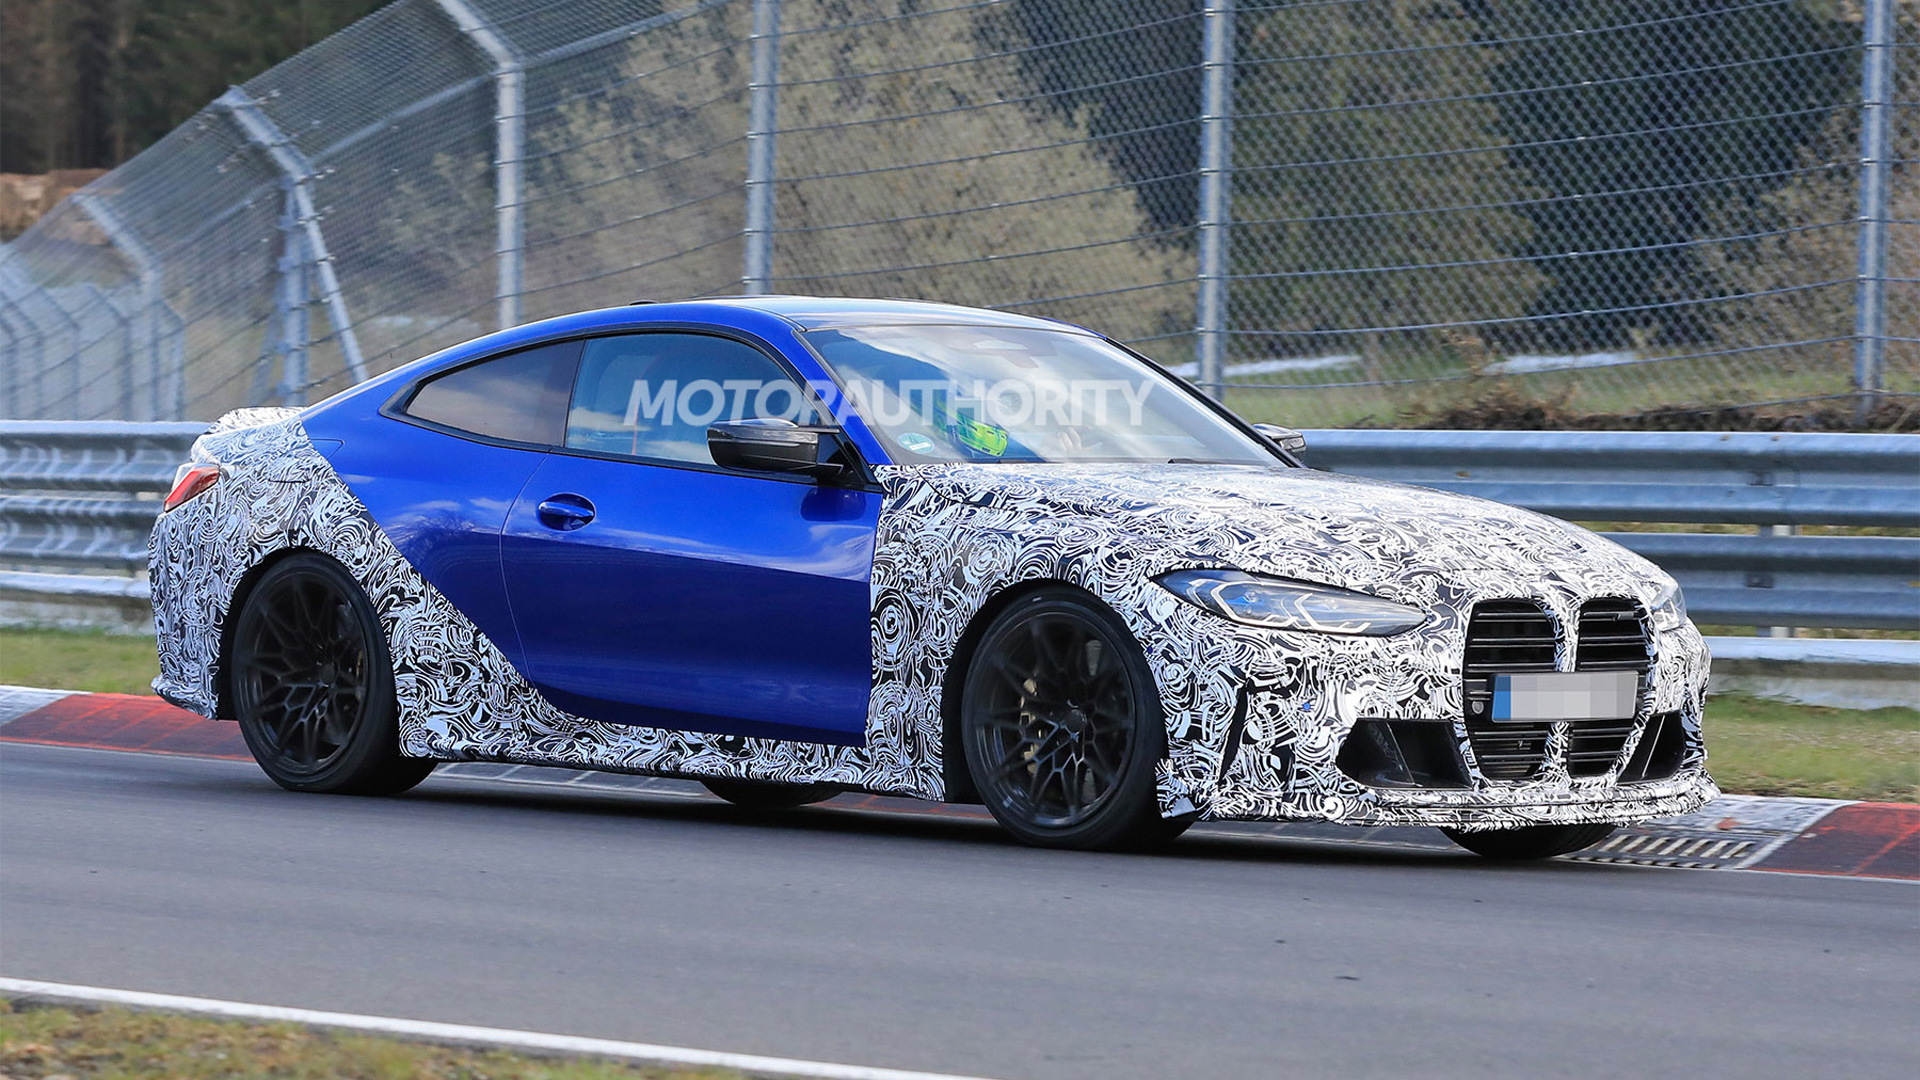 23 Bmw M4 Cs Spy Shots Hardcore M4 Coupe In The Works